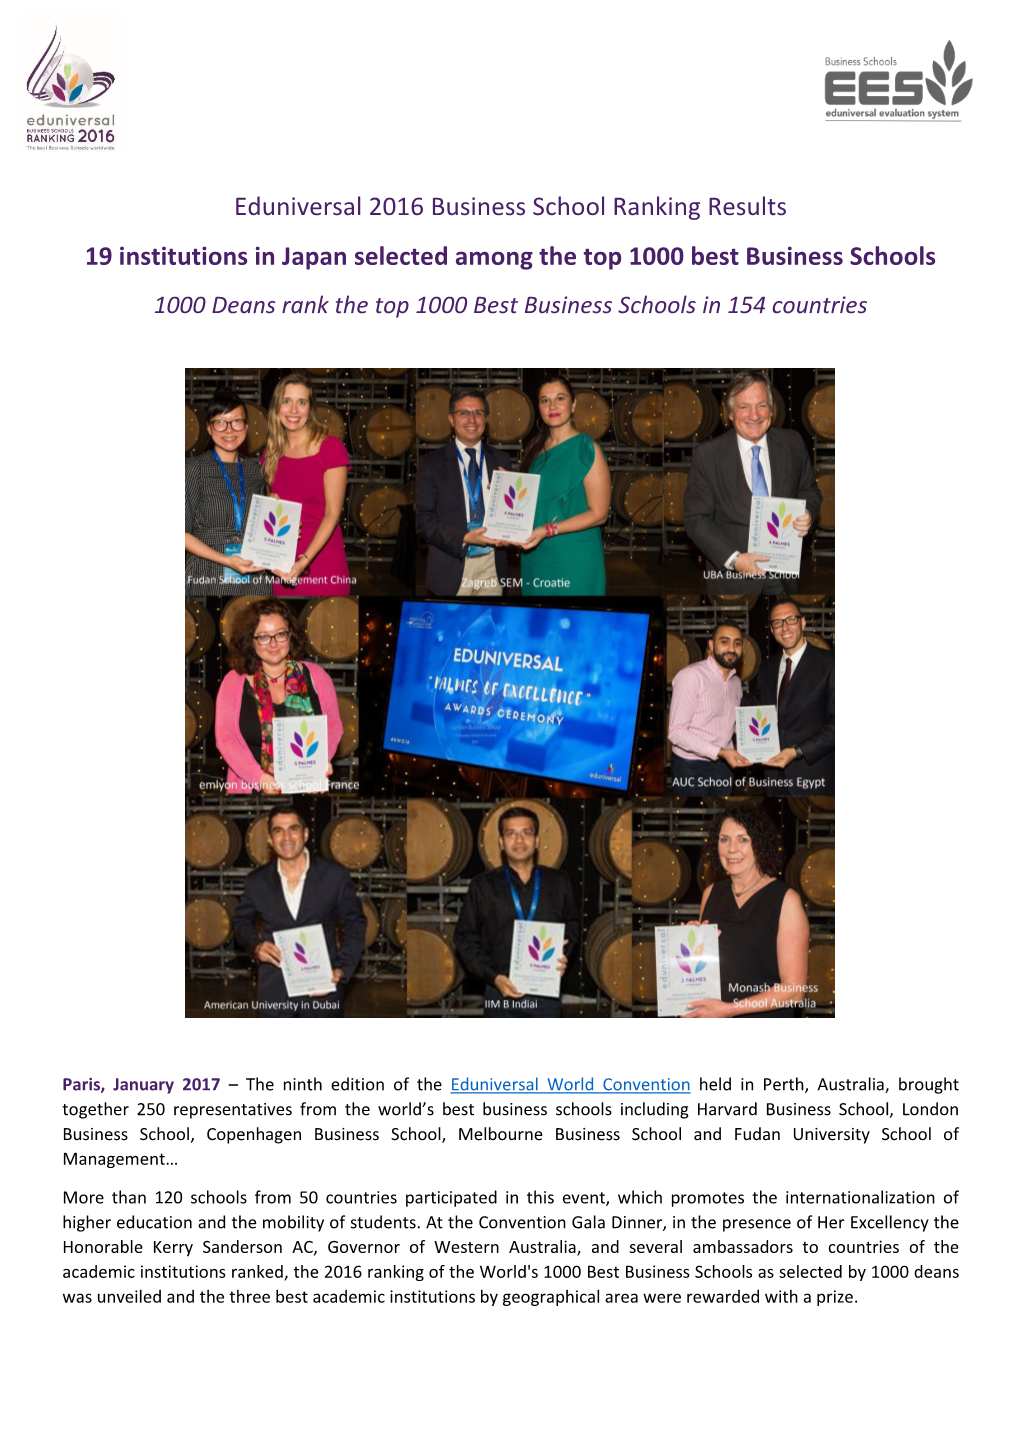 Eduniversal 2016 Business School Ranking Results 19 Institutions in Japan Selected Among the Top 1000 Best Business Schools